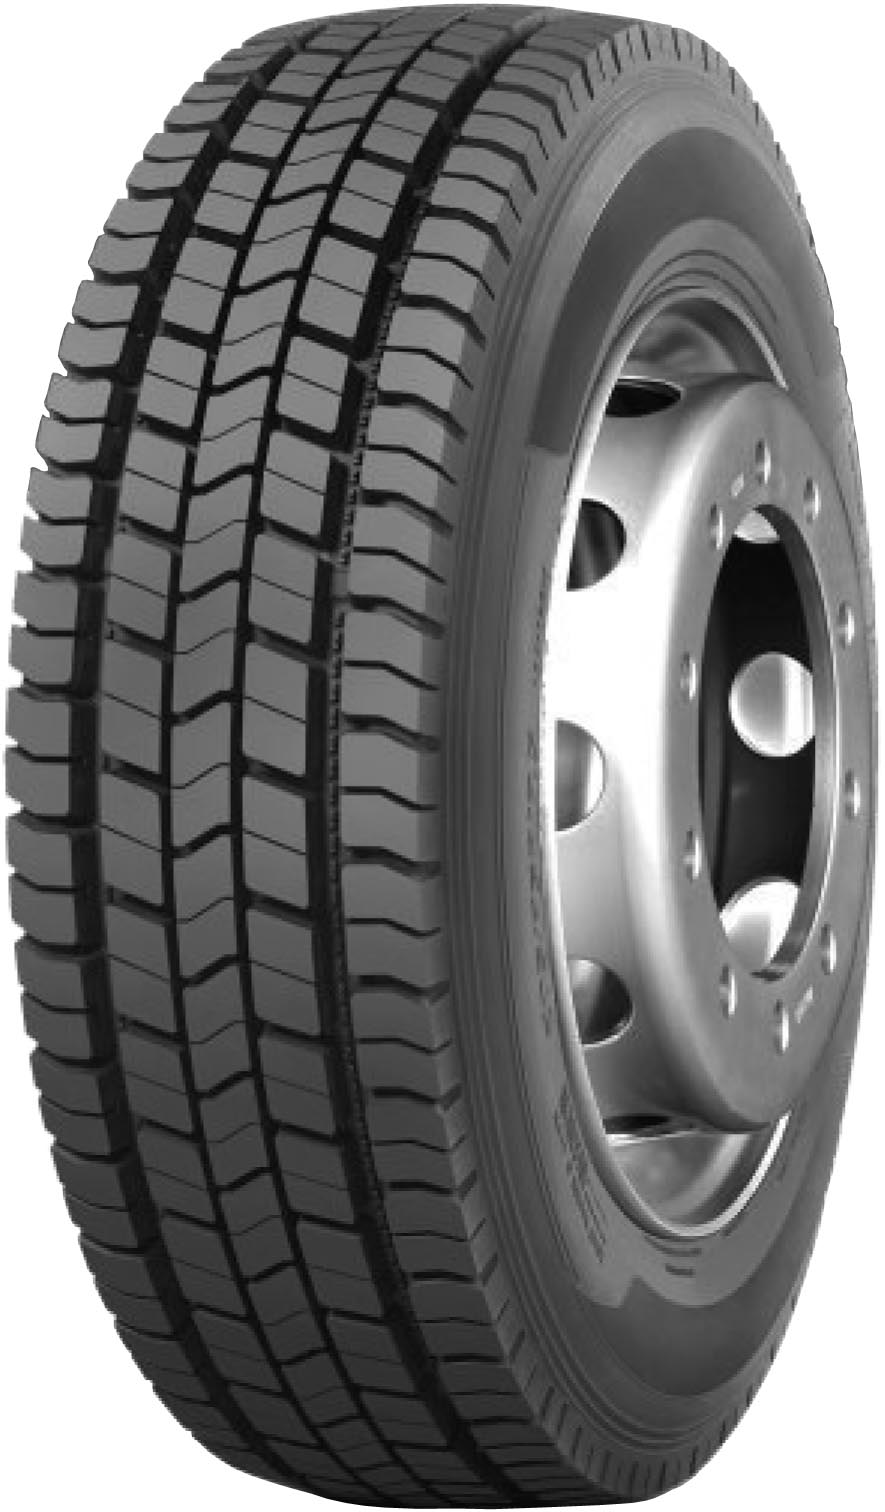 product_type-heavy_tires TRAZANO TDR+1 16 TL 245/70 R17.5 136M